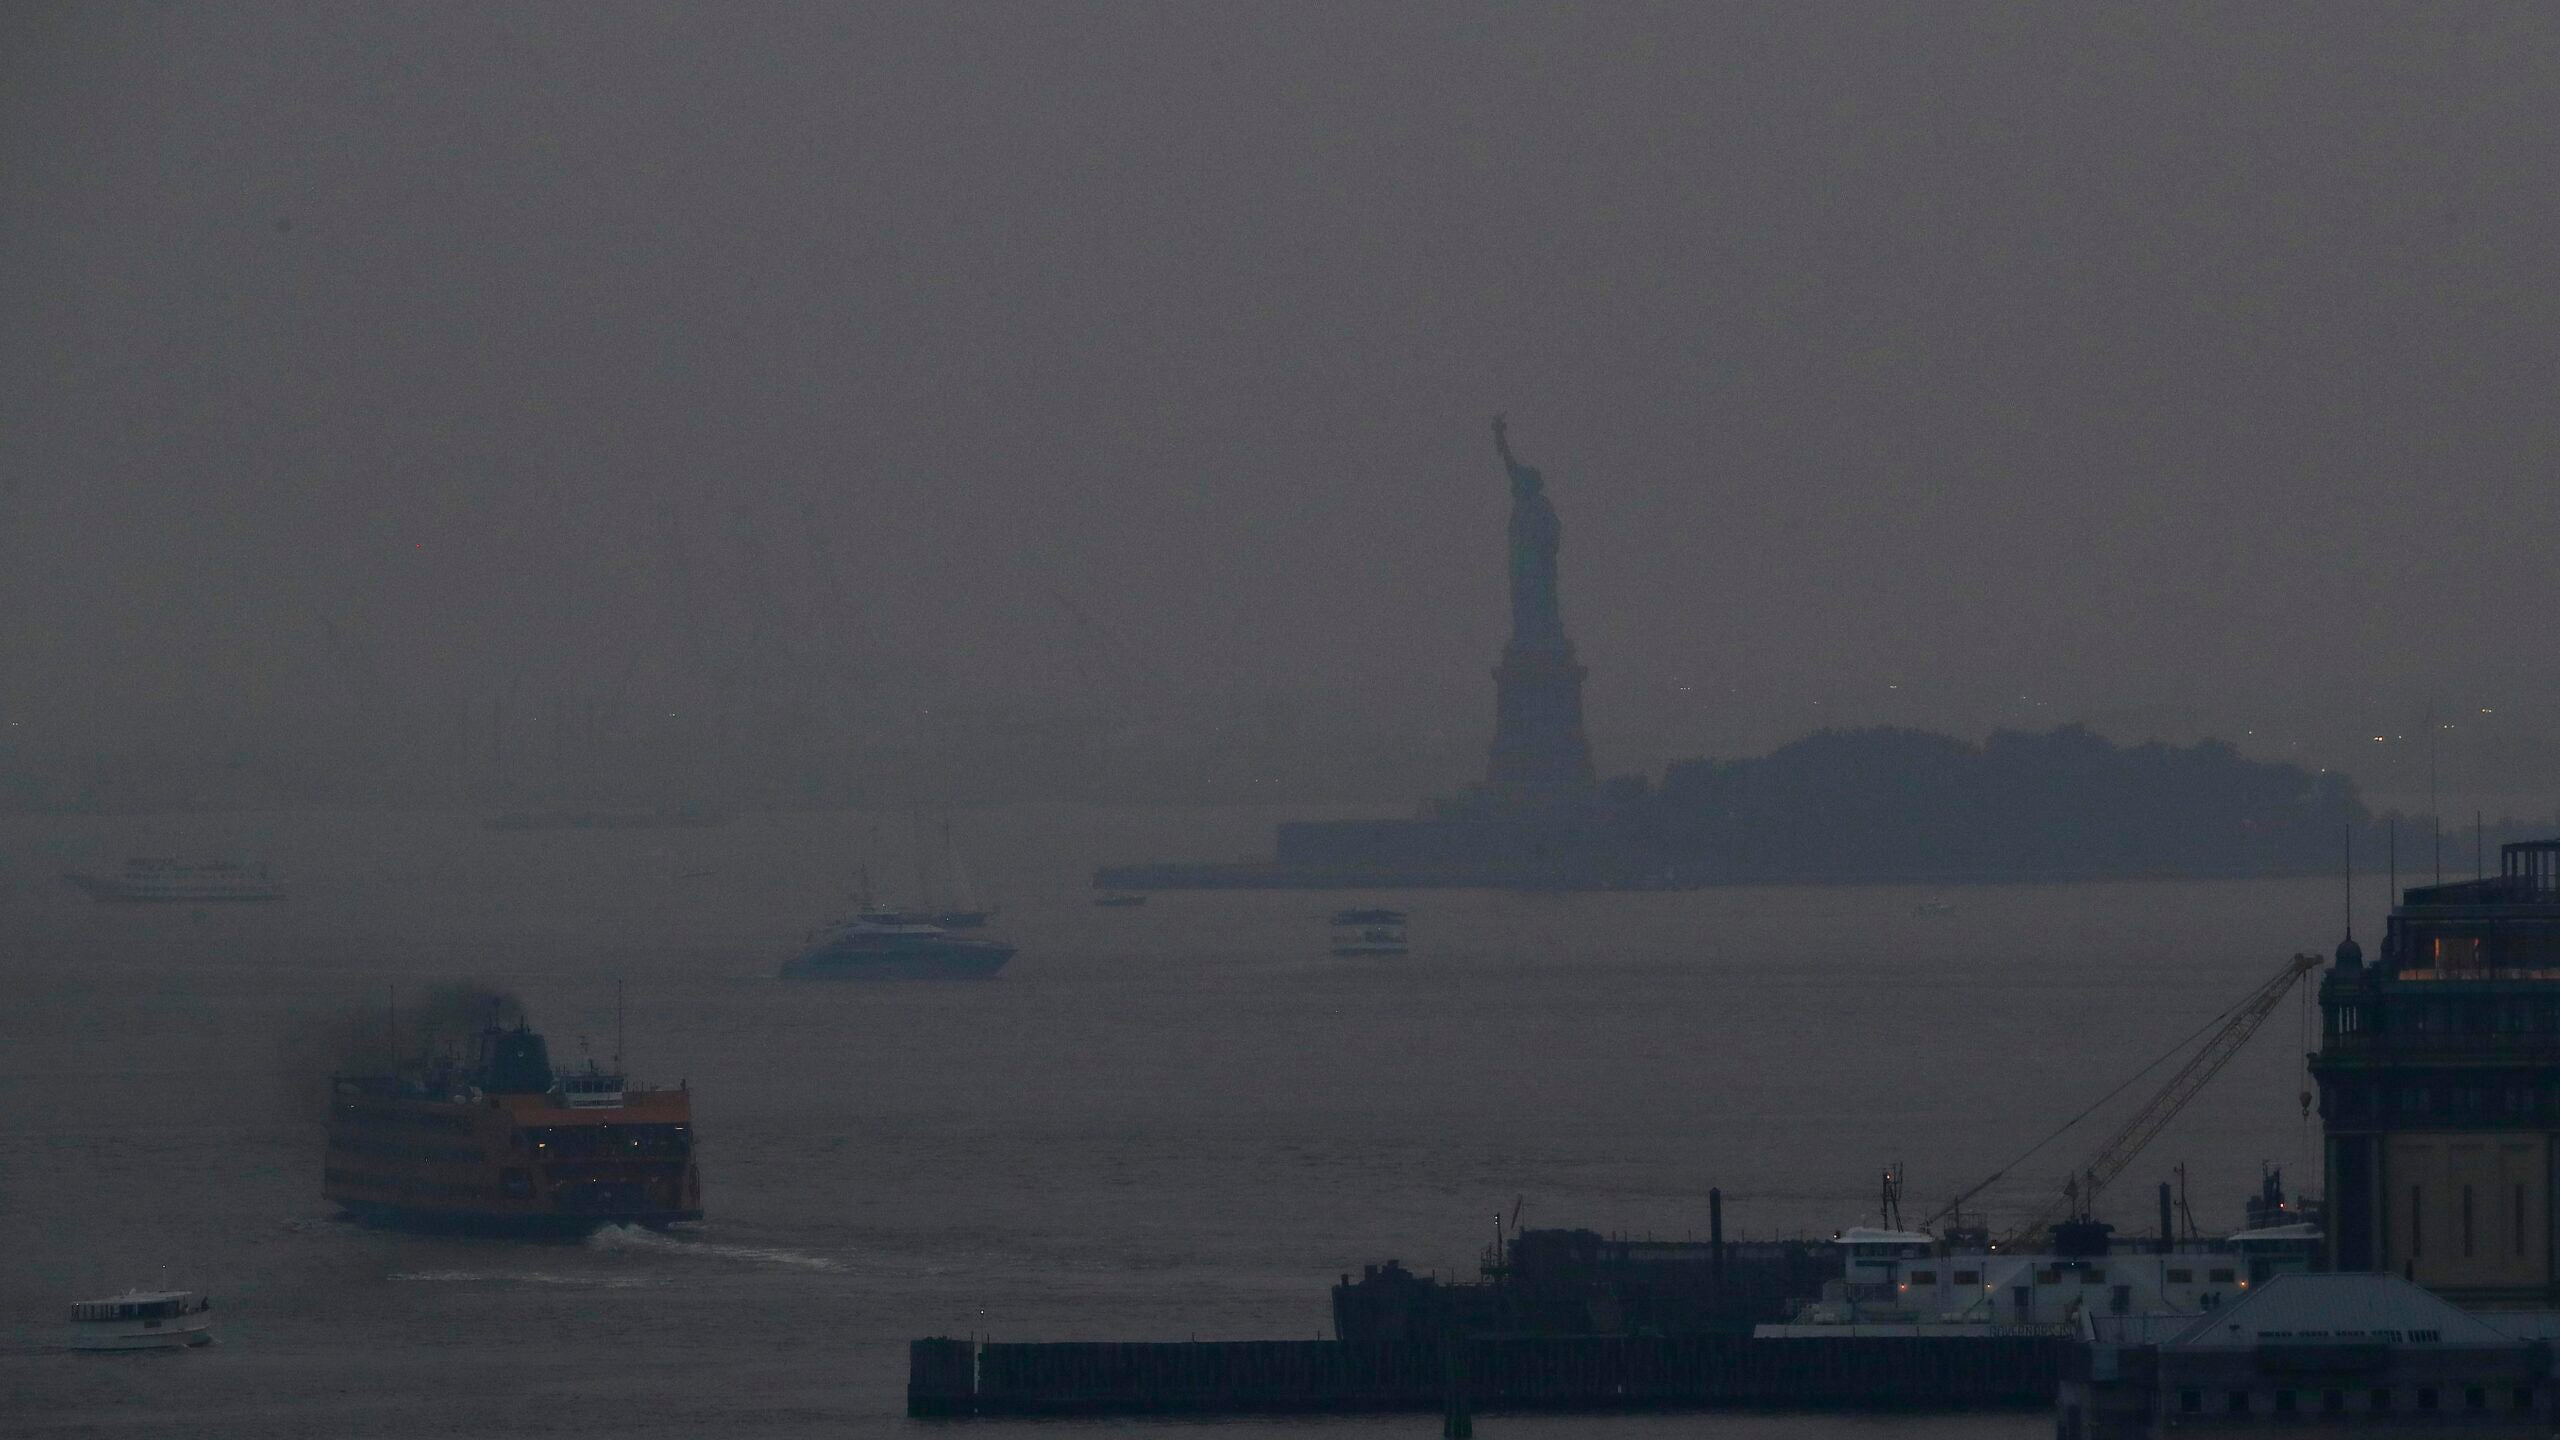 Statue of Liberty shrouded in smoke from wildfires on West Coast.